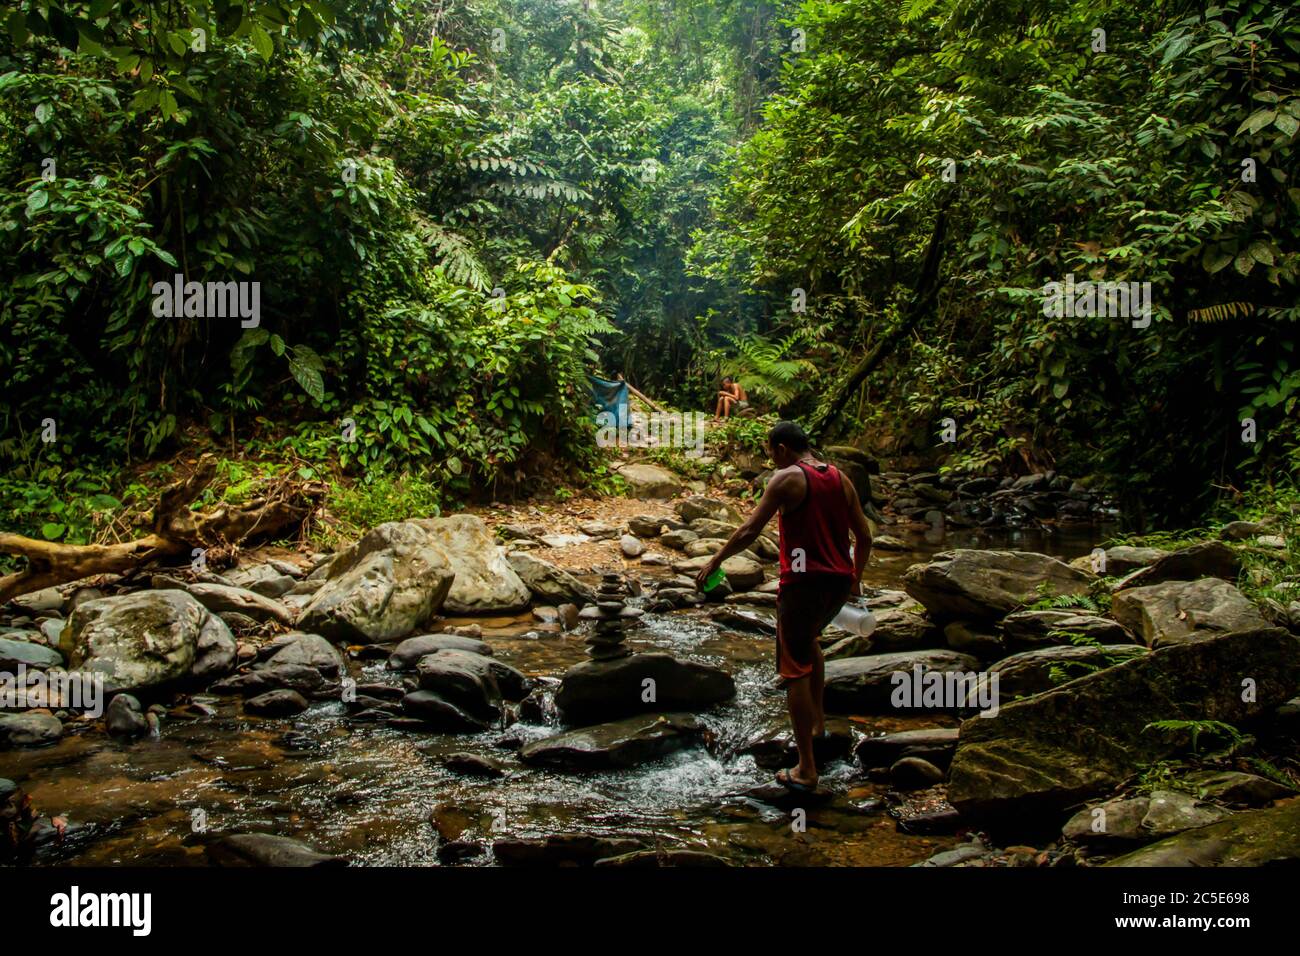 Local man crossing the river in the rainforest Stock Photo